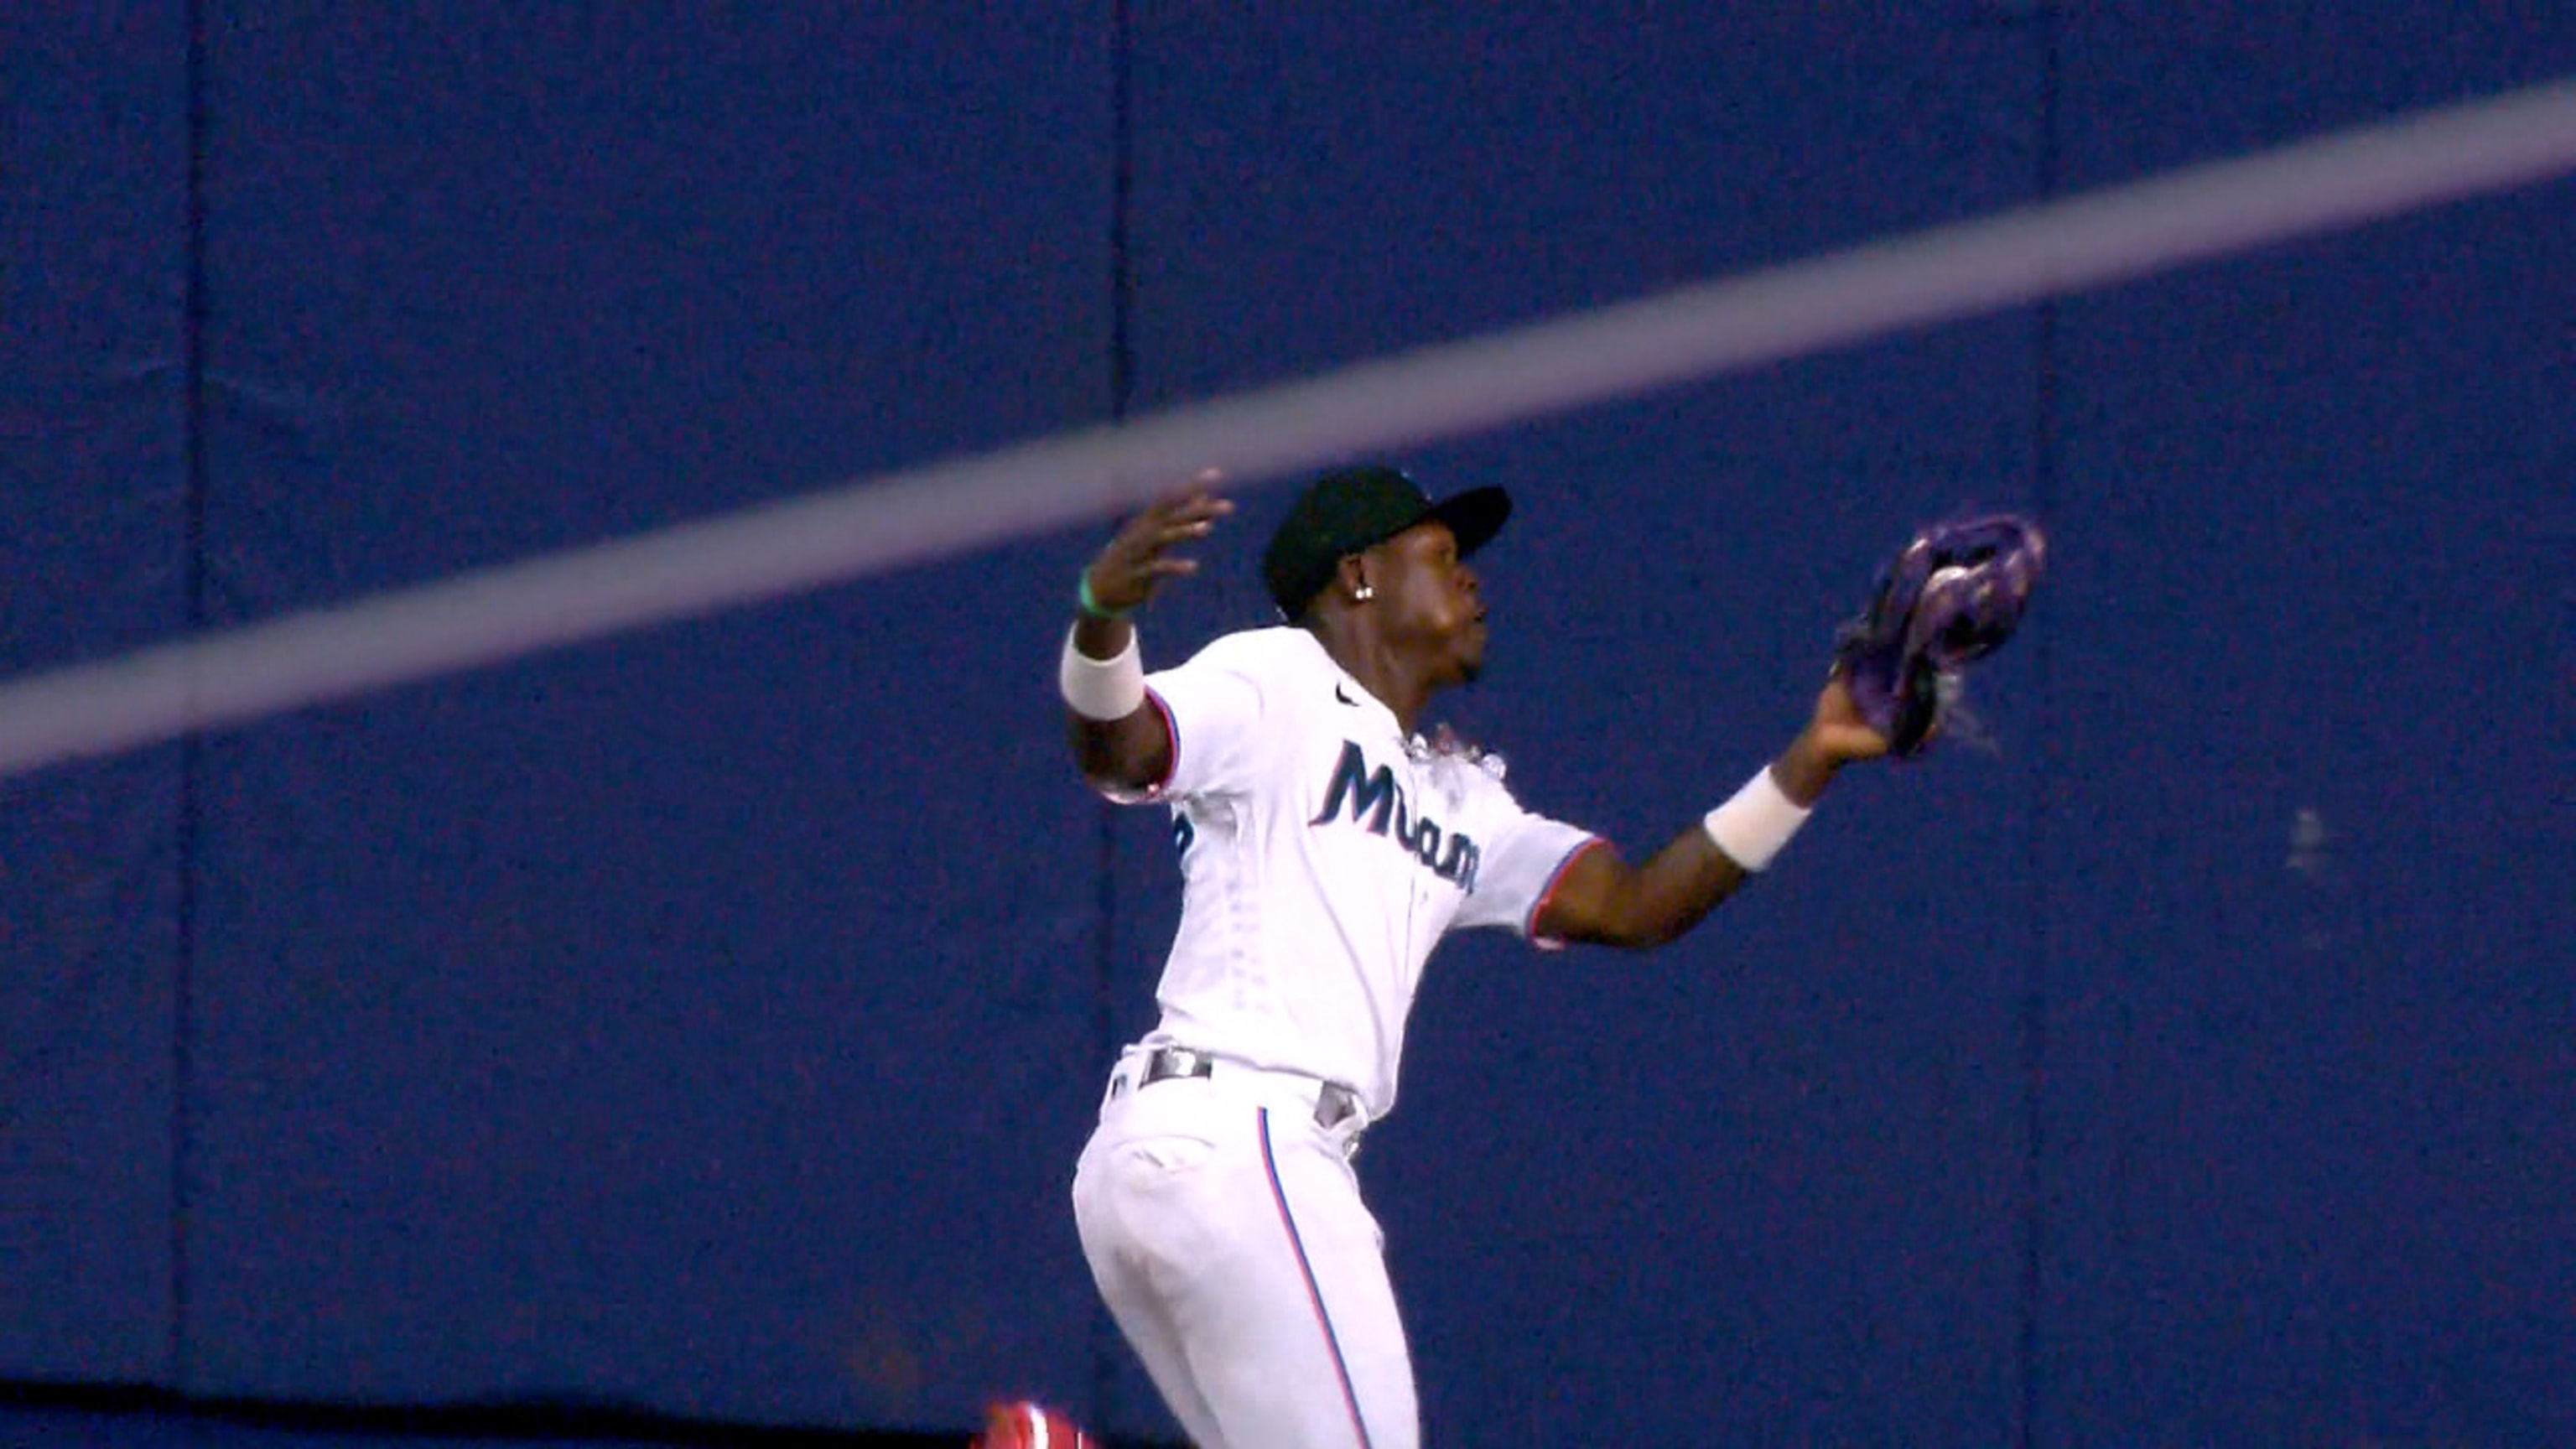 Jazz Chisholm Jr.'s 15th home run seals Marlins' series win over